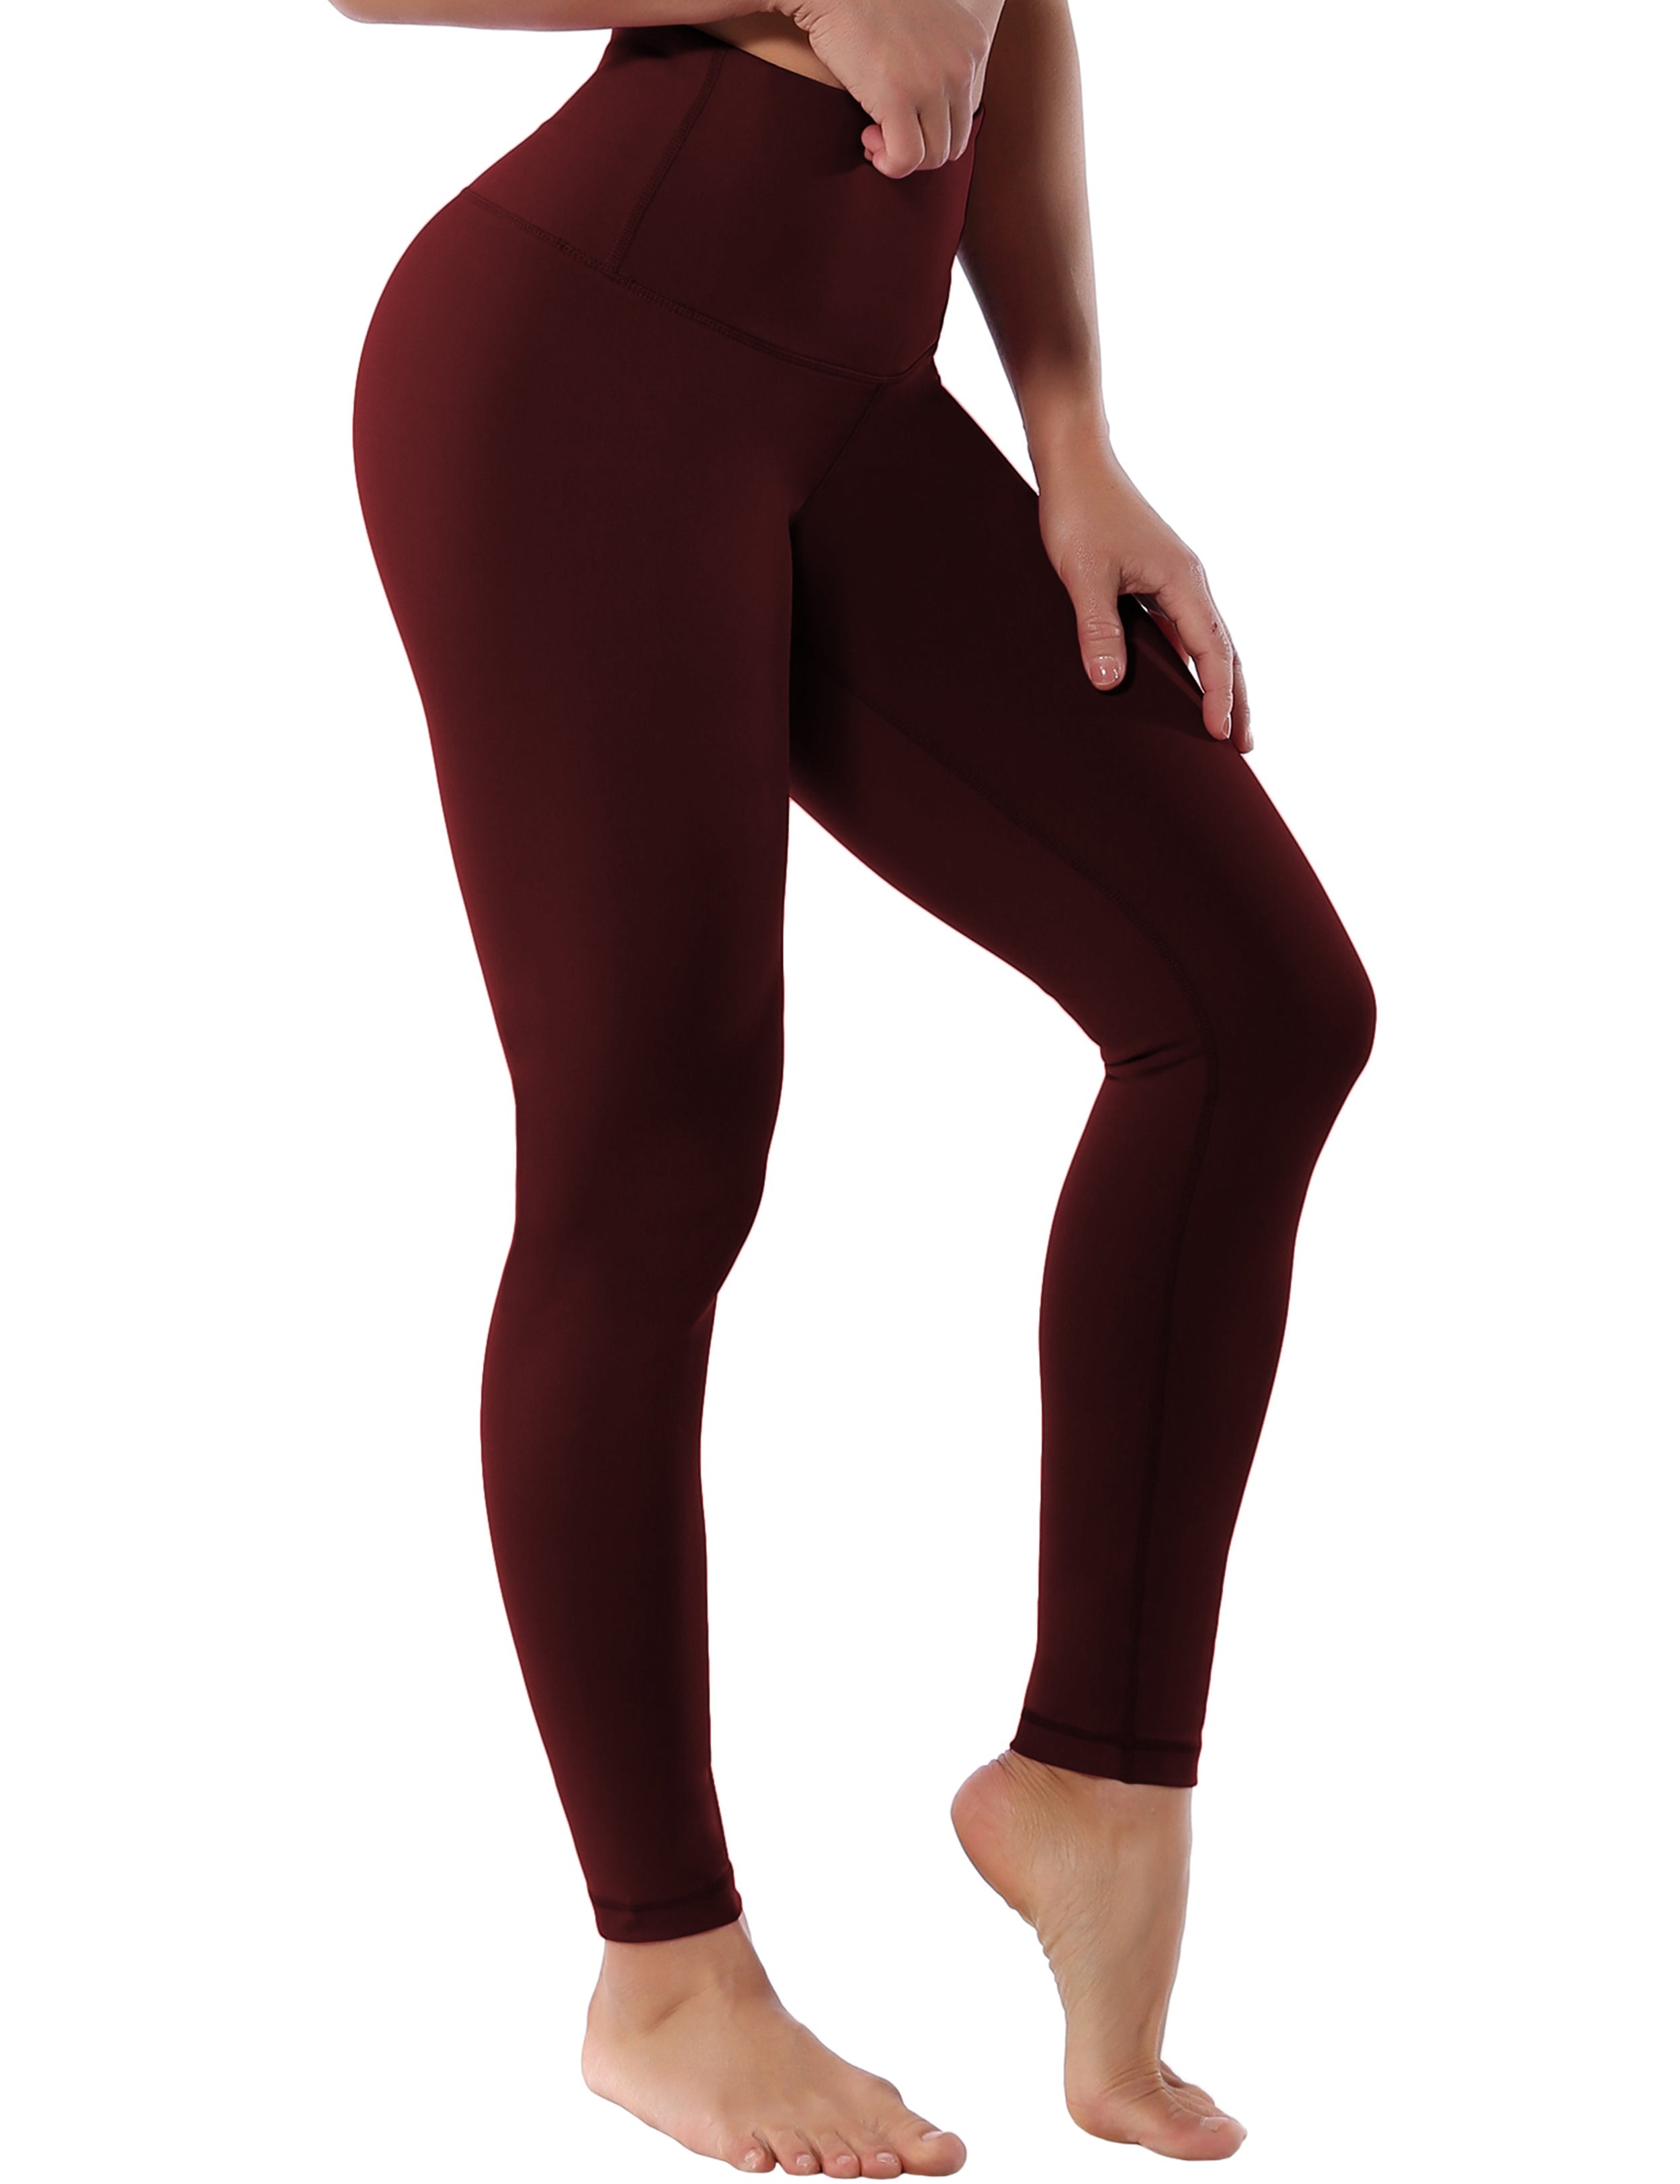 High Waist Jogging Pants cherryred 75%Nylon/25%Spandex Fabric doesn't attract lint easily 4-way stretch No see-through Moisture-wicking Tummy control Inner pocket Four lengths